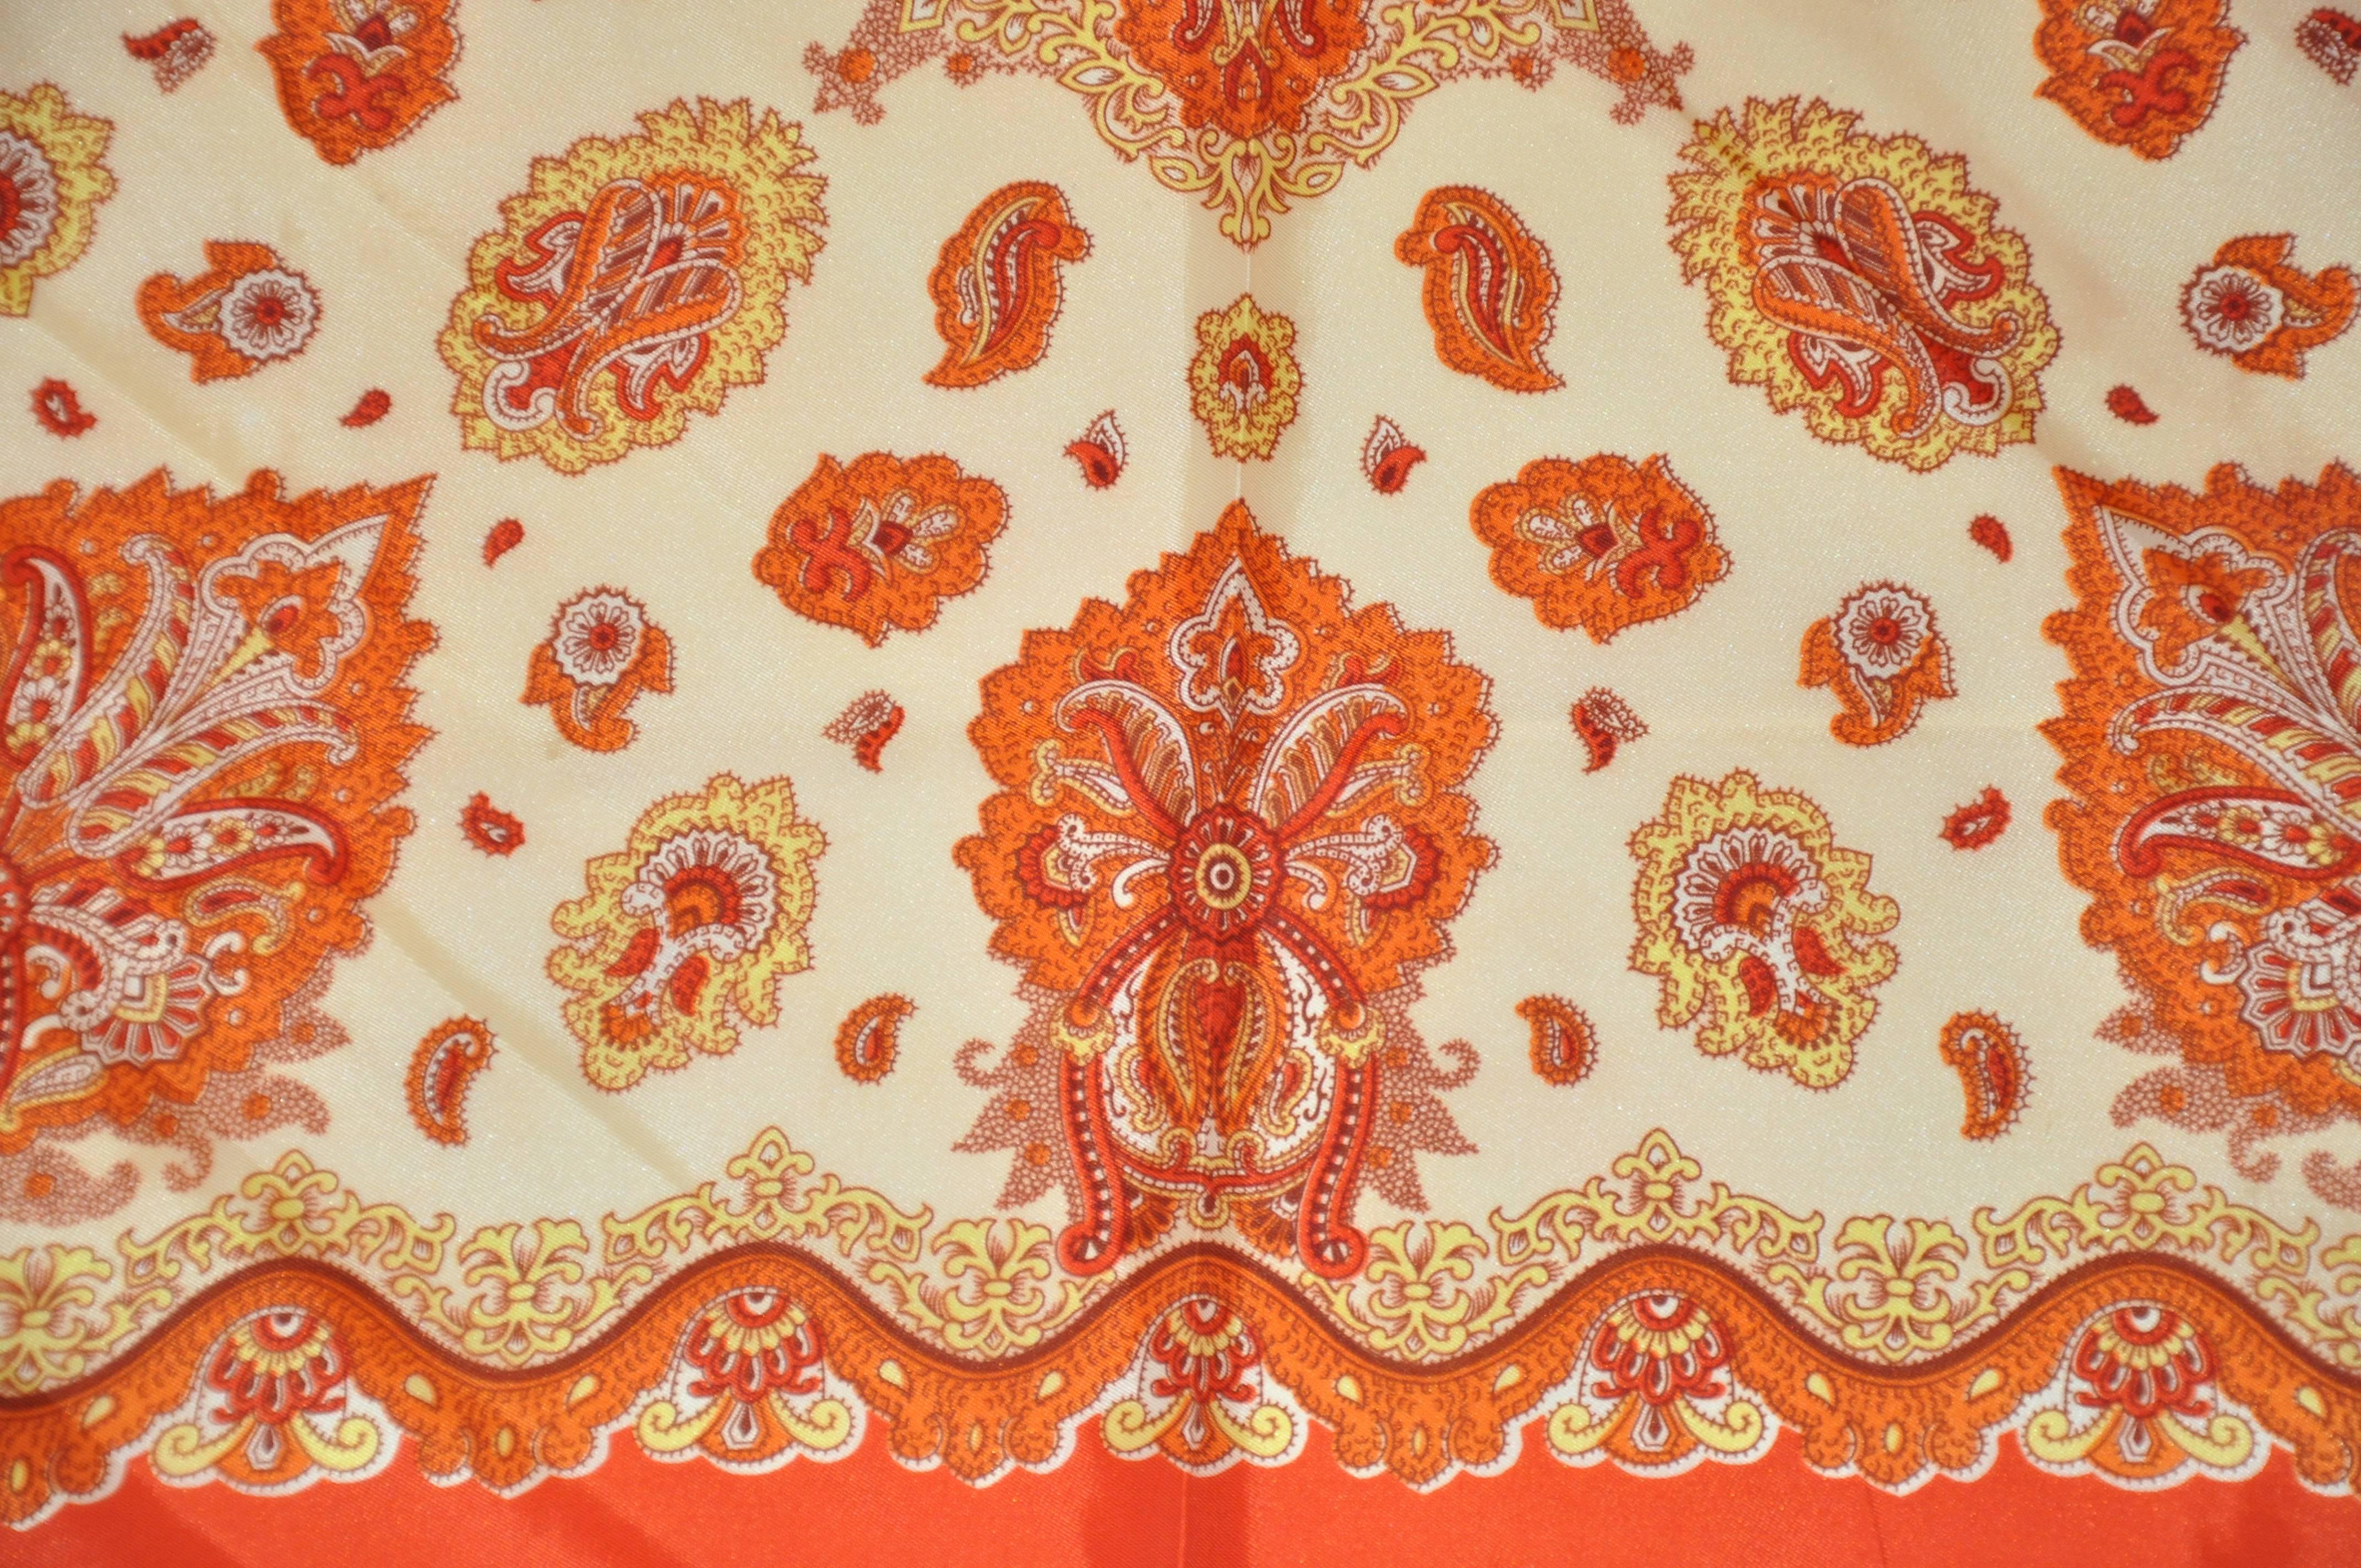 Vivid Multi Shades of Tangerine & Orange Hues Bold Palsey Scarf In Good Condition For Sale In New York, NY